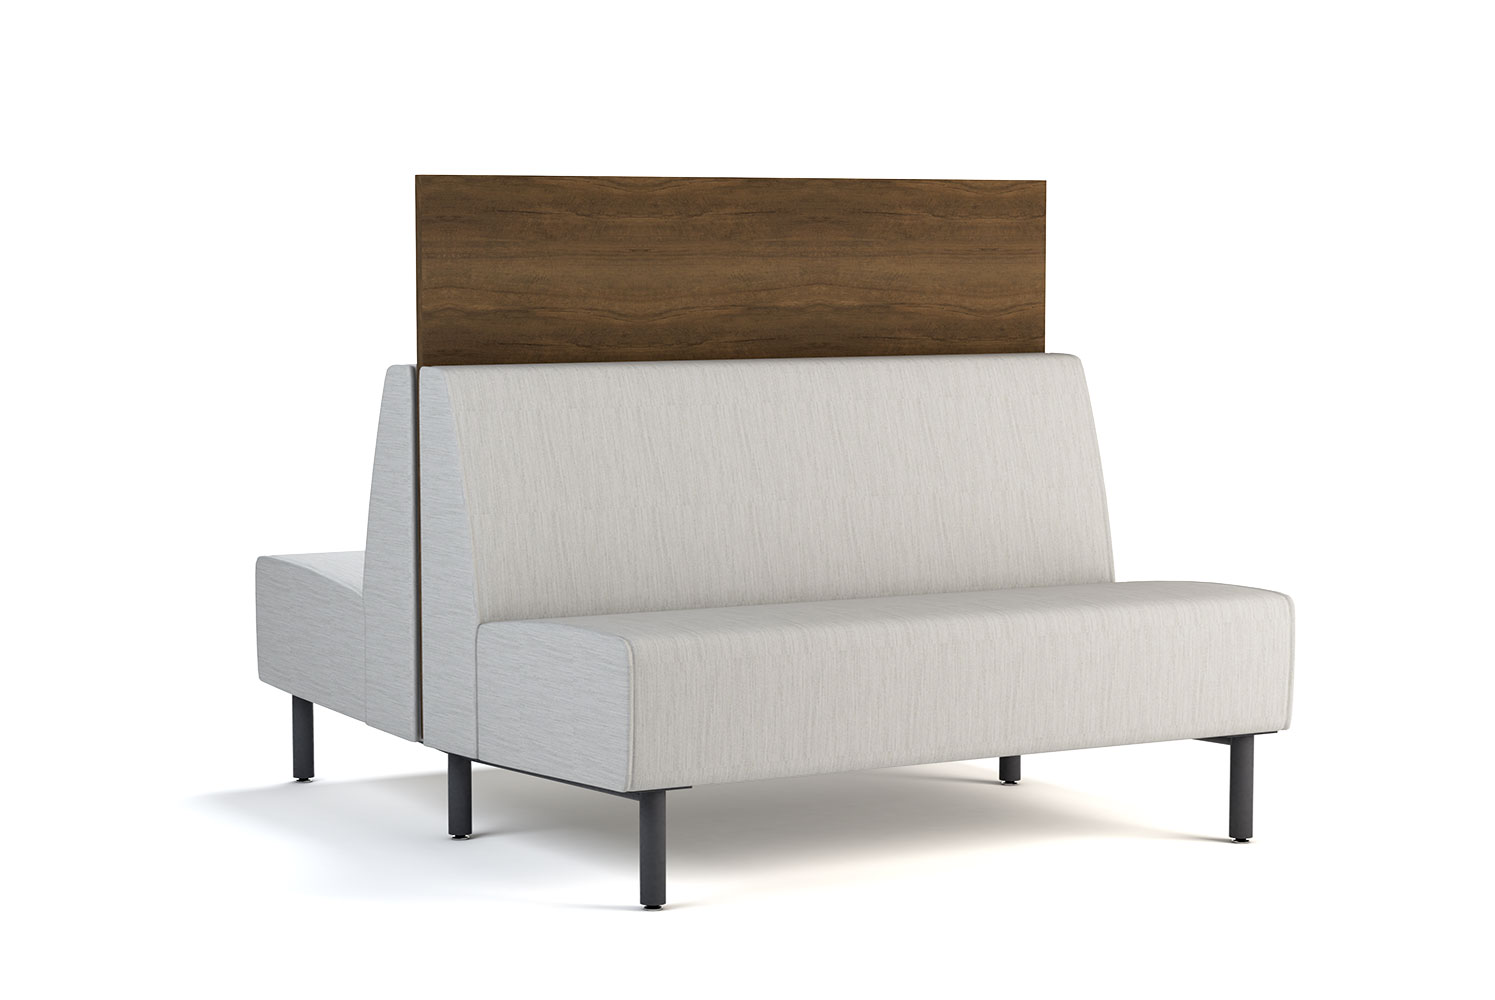 Tivoli 48 inch Back-to-Back Banquette with Laminate Panel